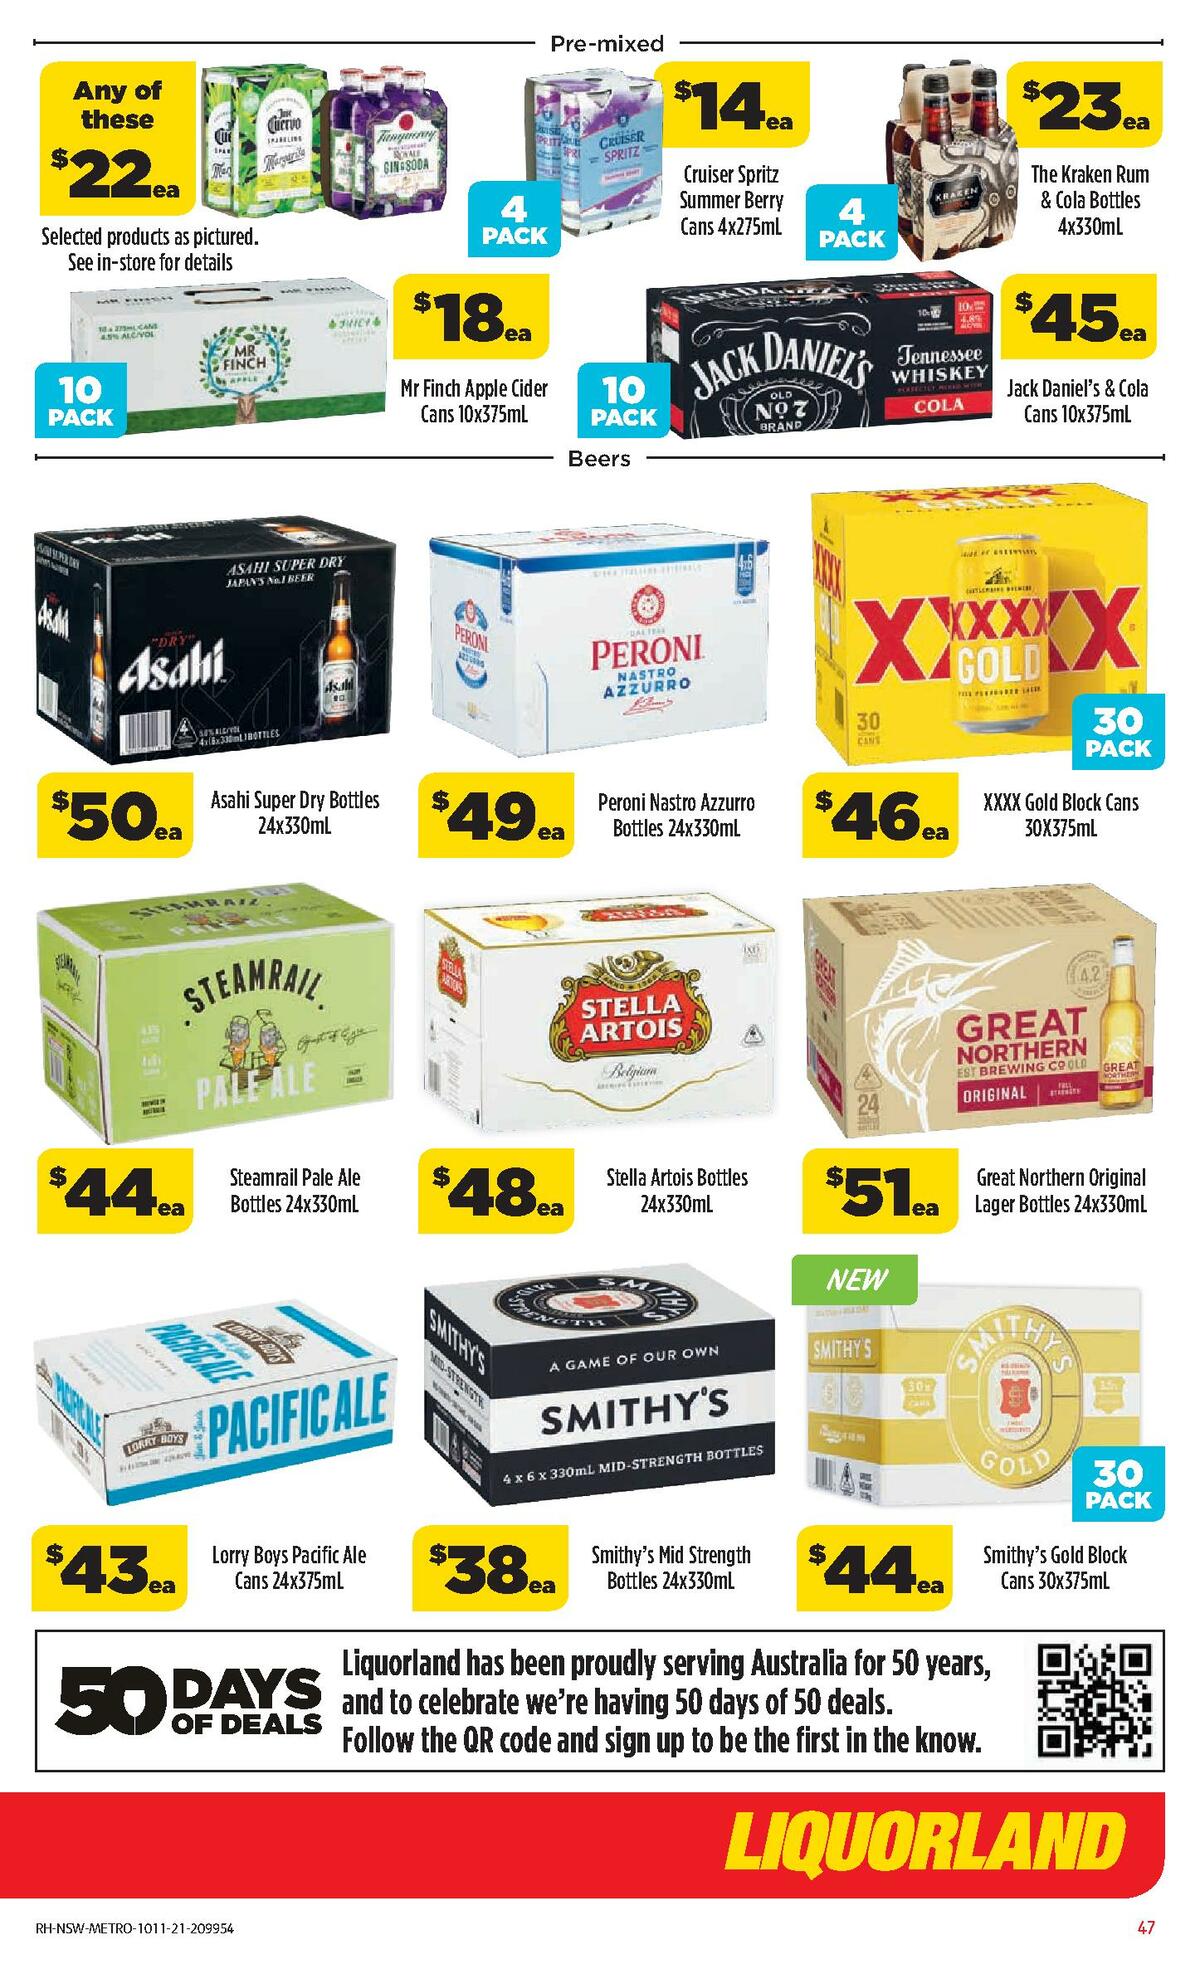 Coles Catalogues from 10 November